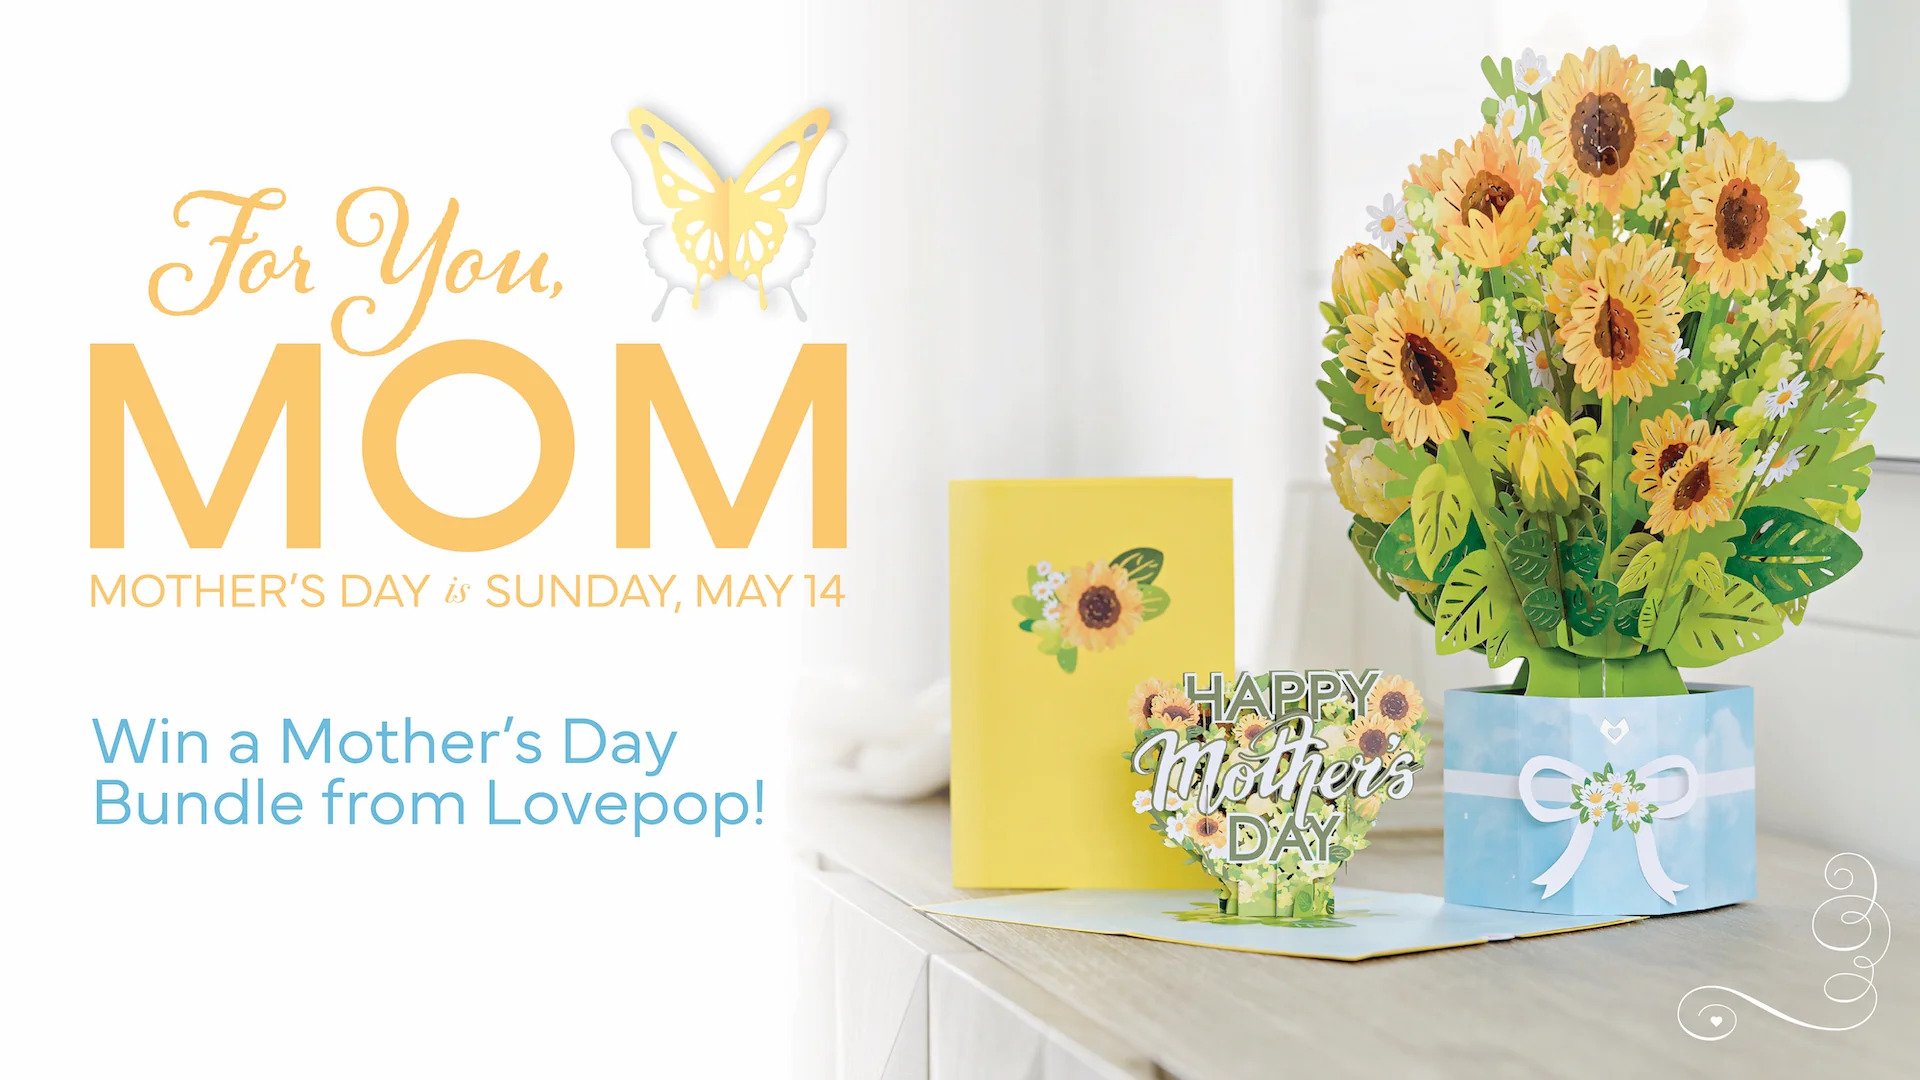 Lovepop's Mother's Day Giveway